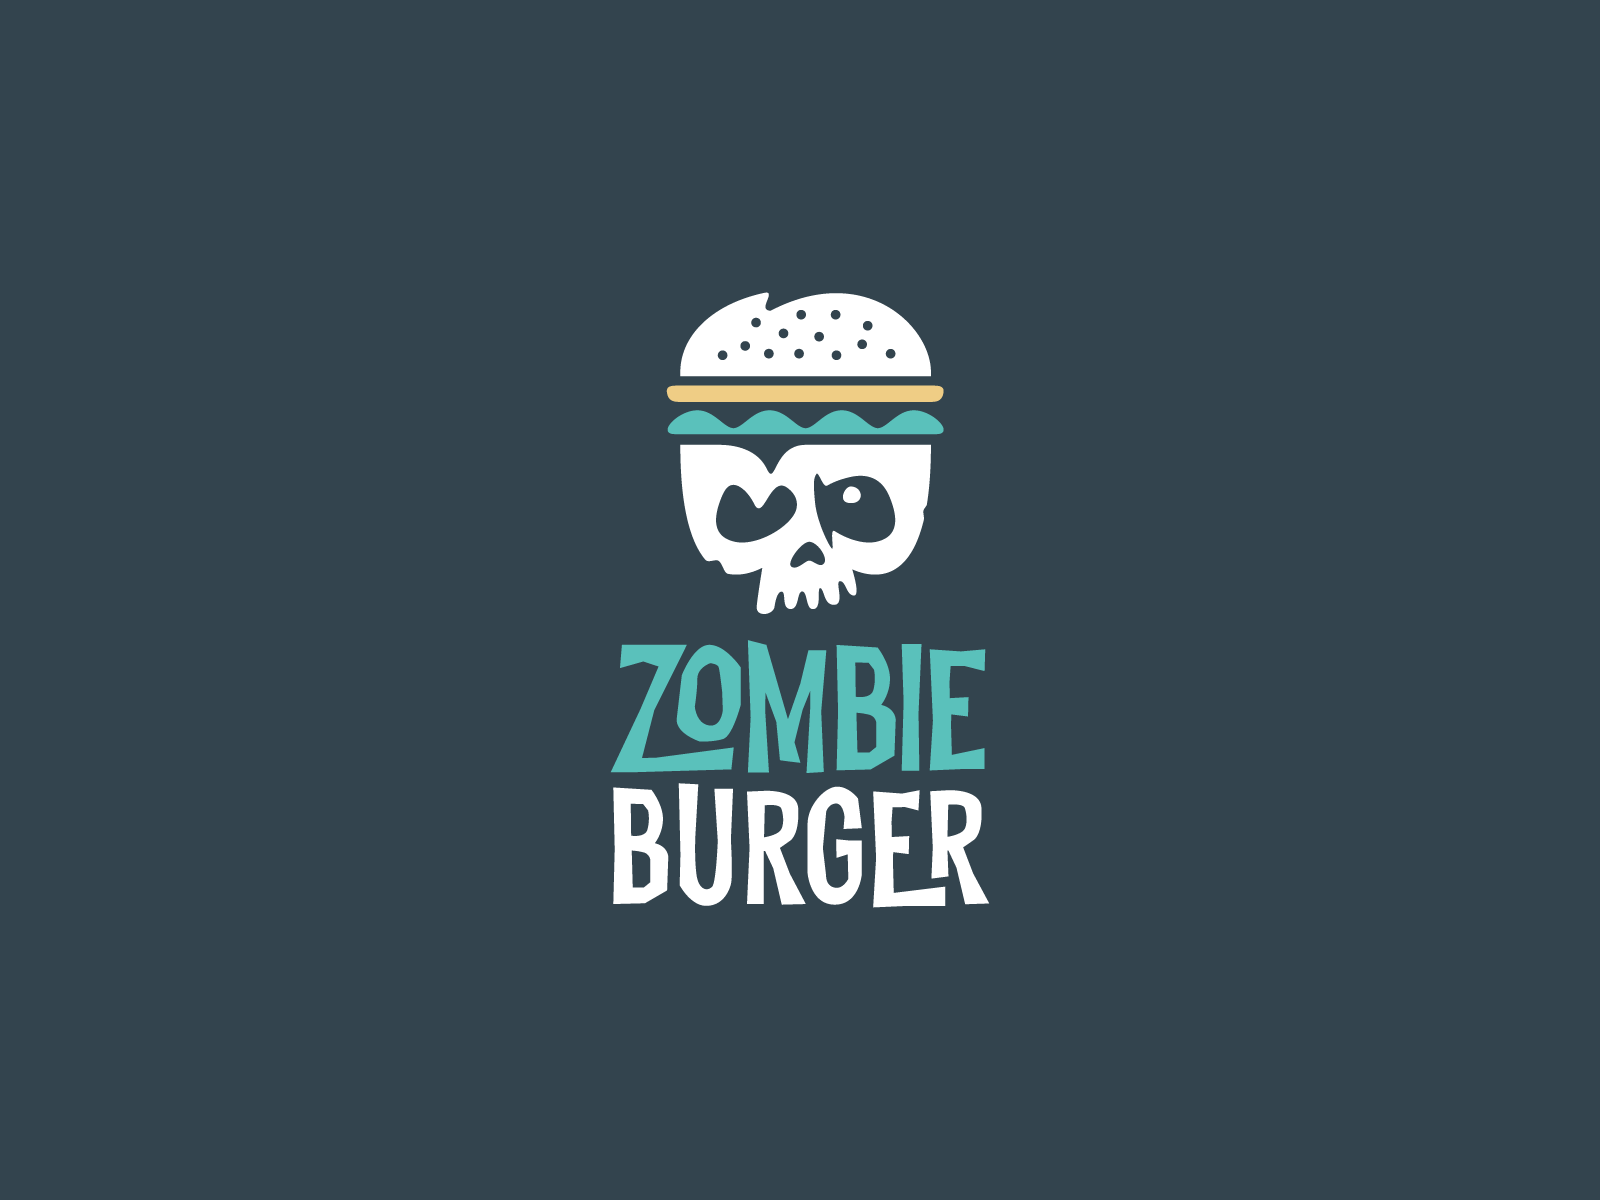 zombies gamer logo Template | PosterMyWall